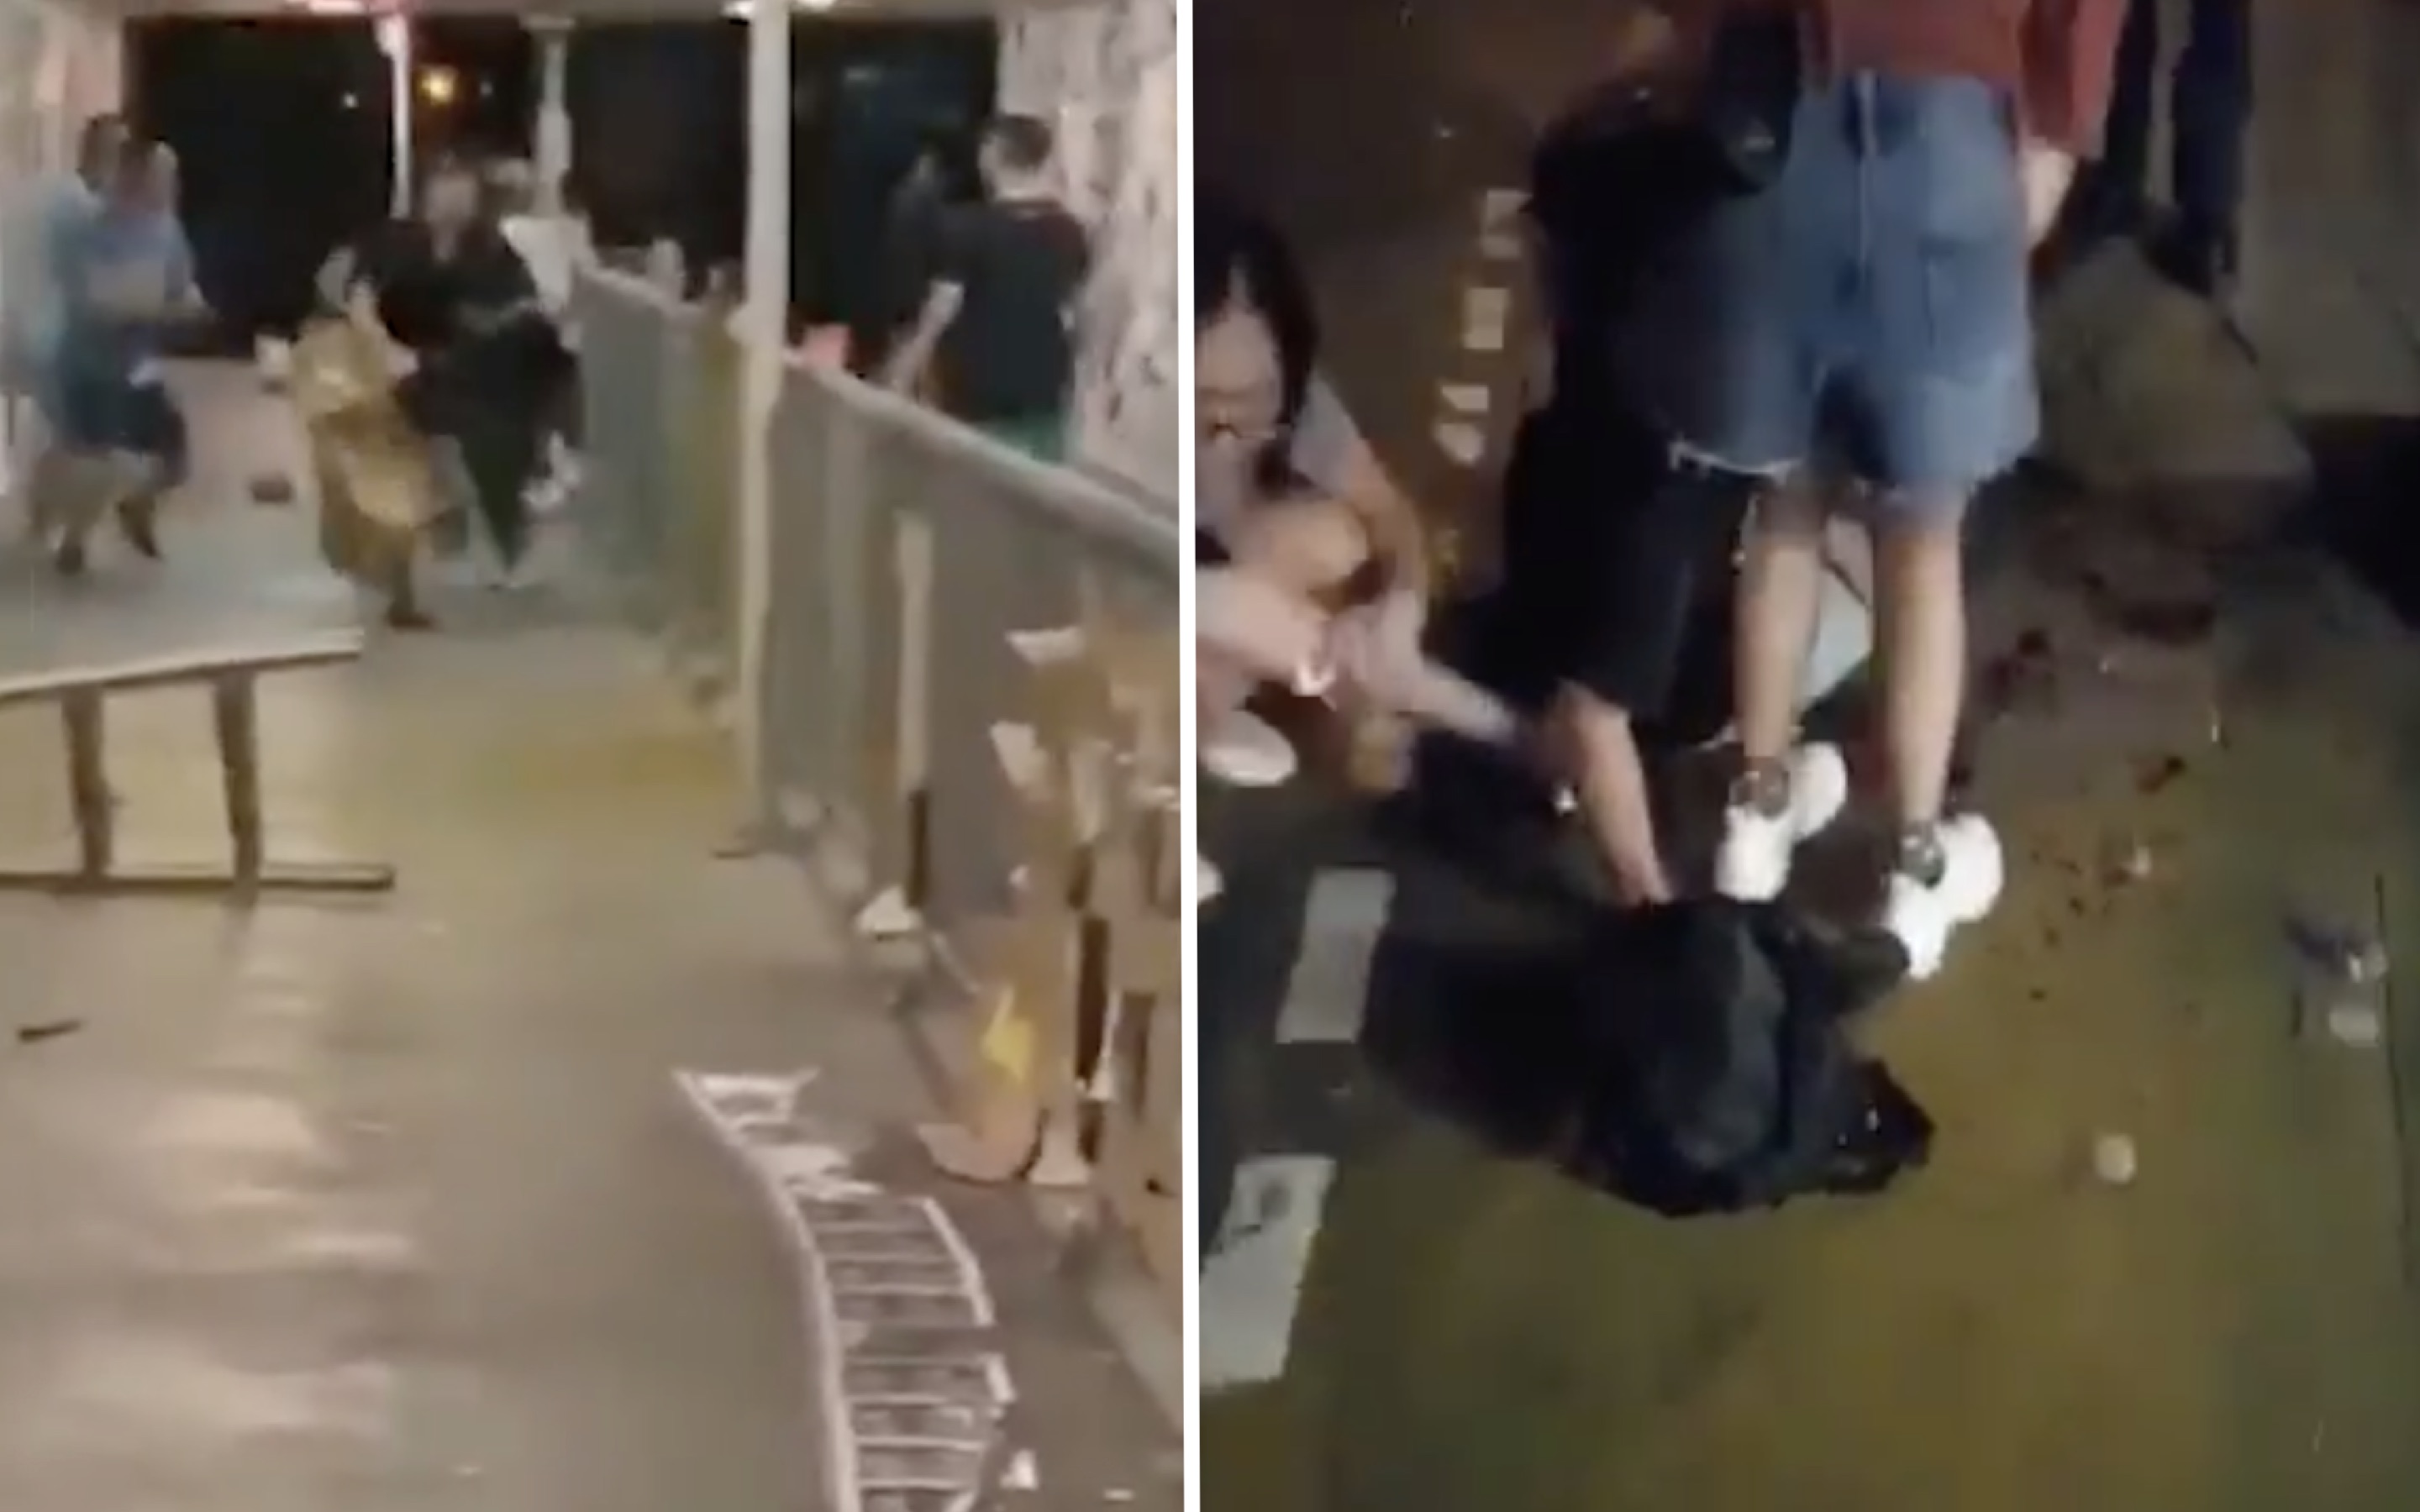 (Left) Video posted online shows the moment a woman flees after being attacked by a man in a blue shirt and wielding a knife. (Right) One of the injured is sitting on the sidewalk after being injured. Screengrabs via Facebook video and Twitter video.